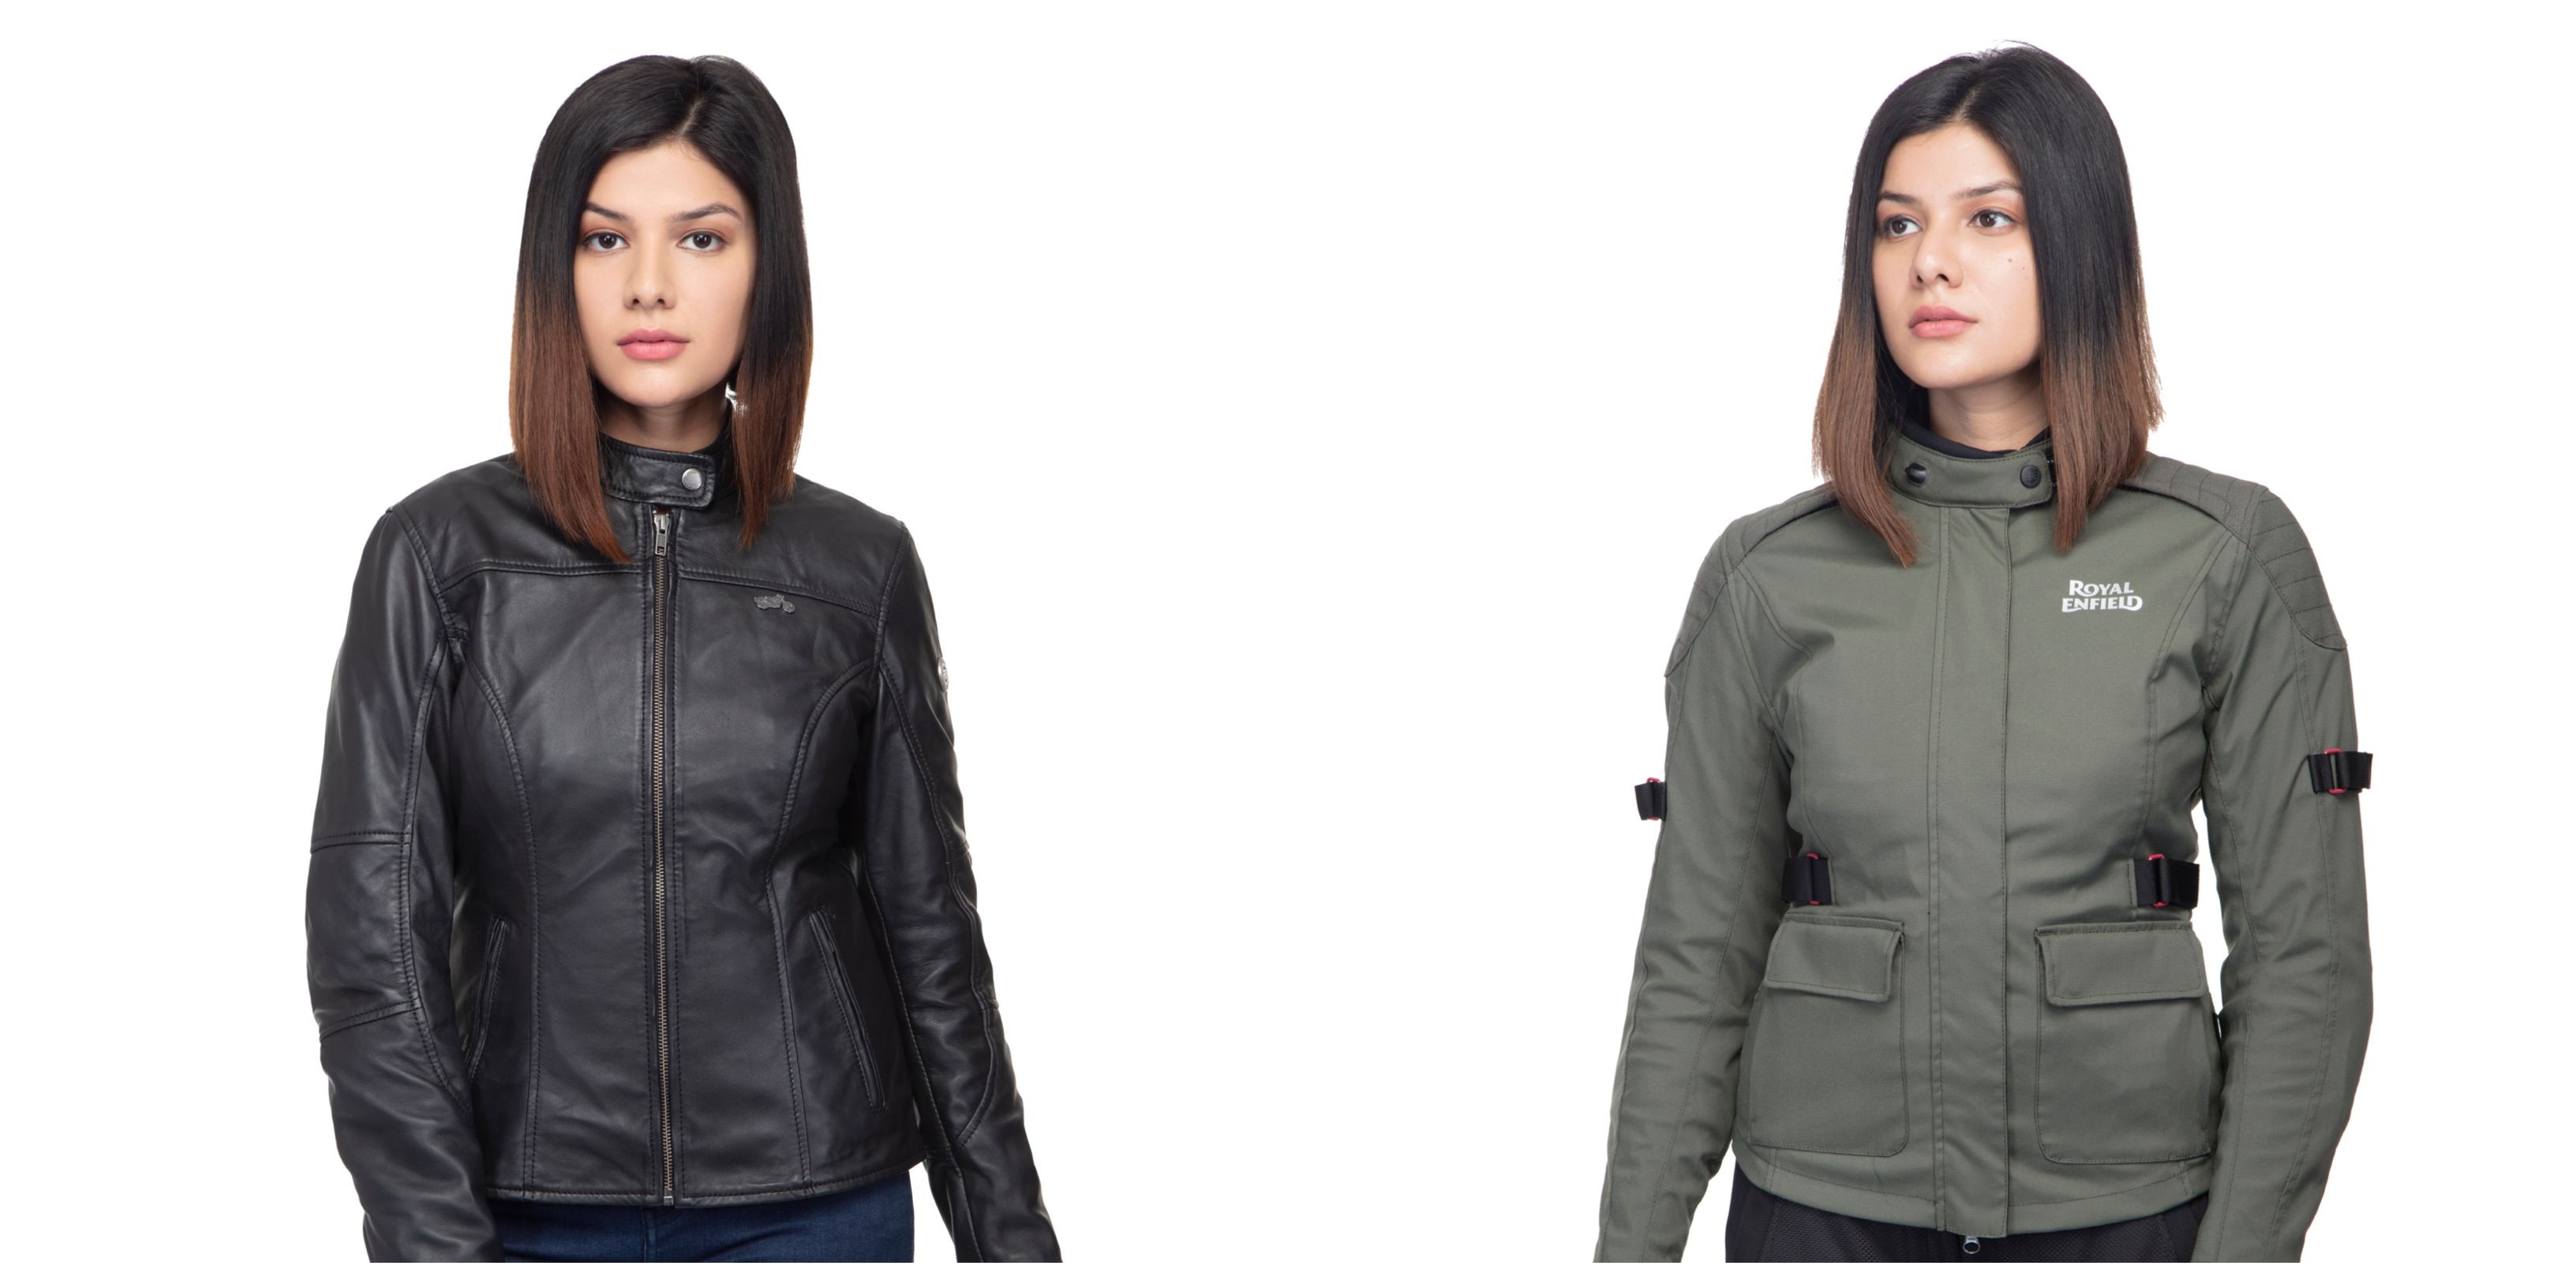 Royal Enfield launches Women's apparel range in India - GaadiKey